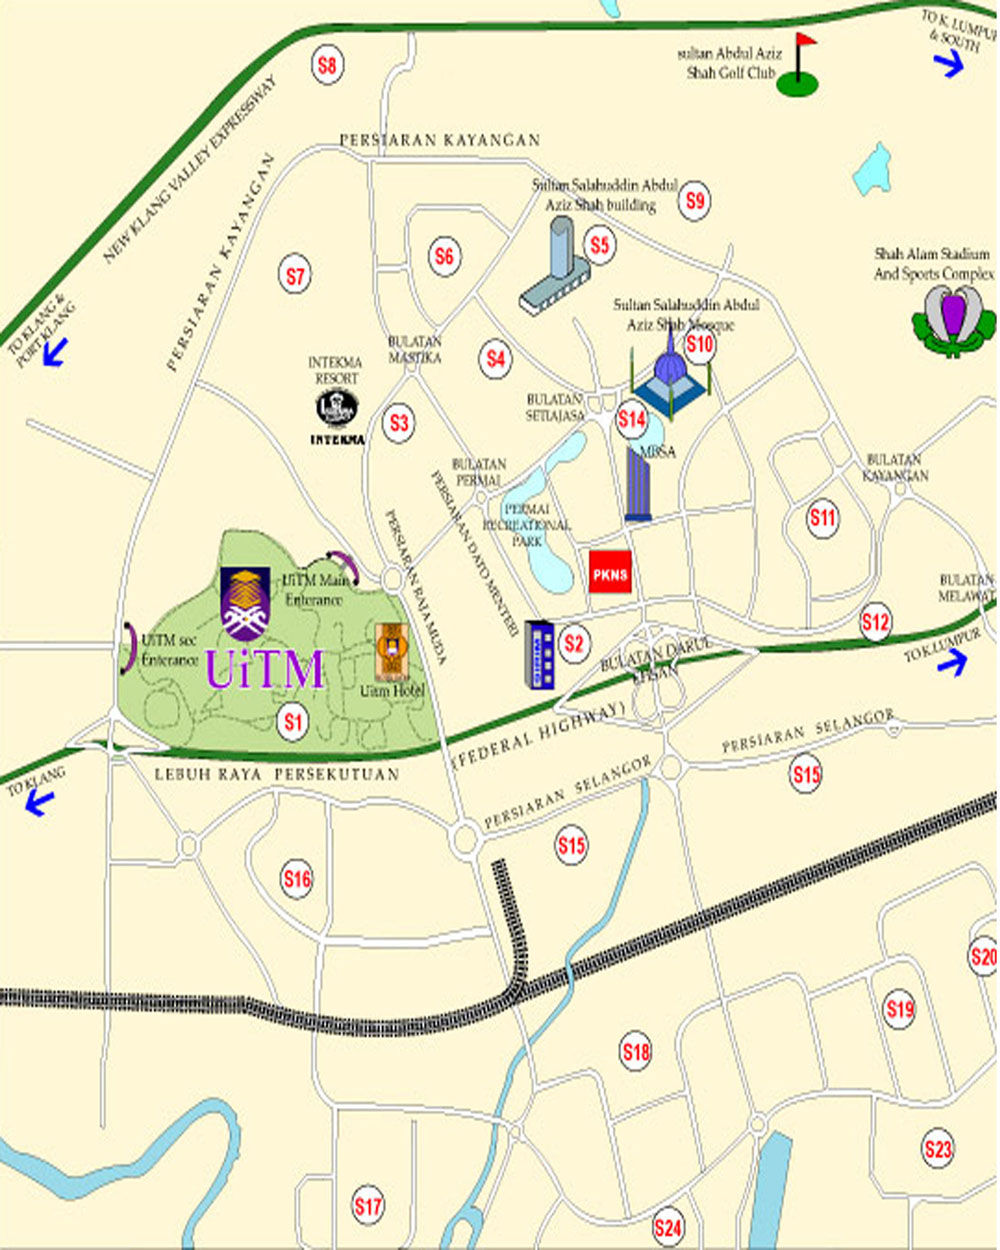 UiTM Shah Alam listed by Malaysiamap.org Map of Malaysia Map Kuala